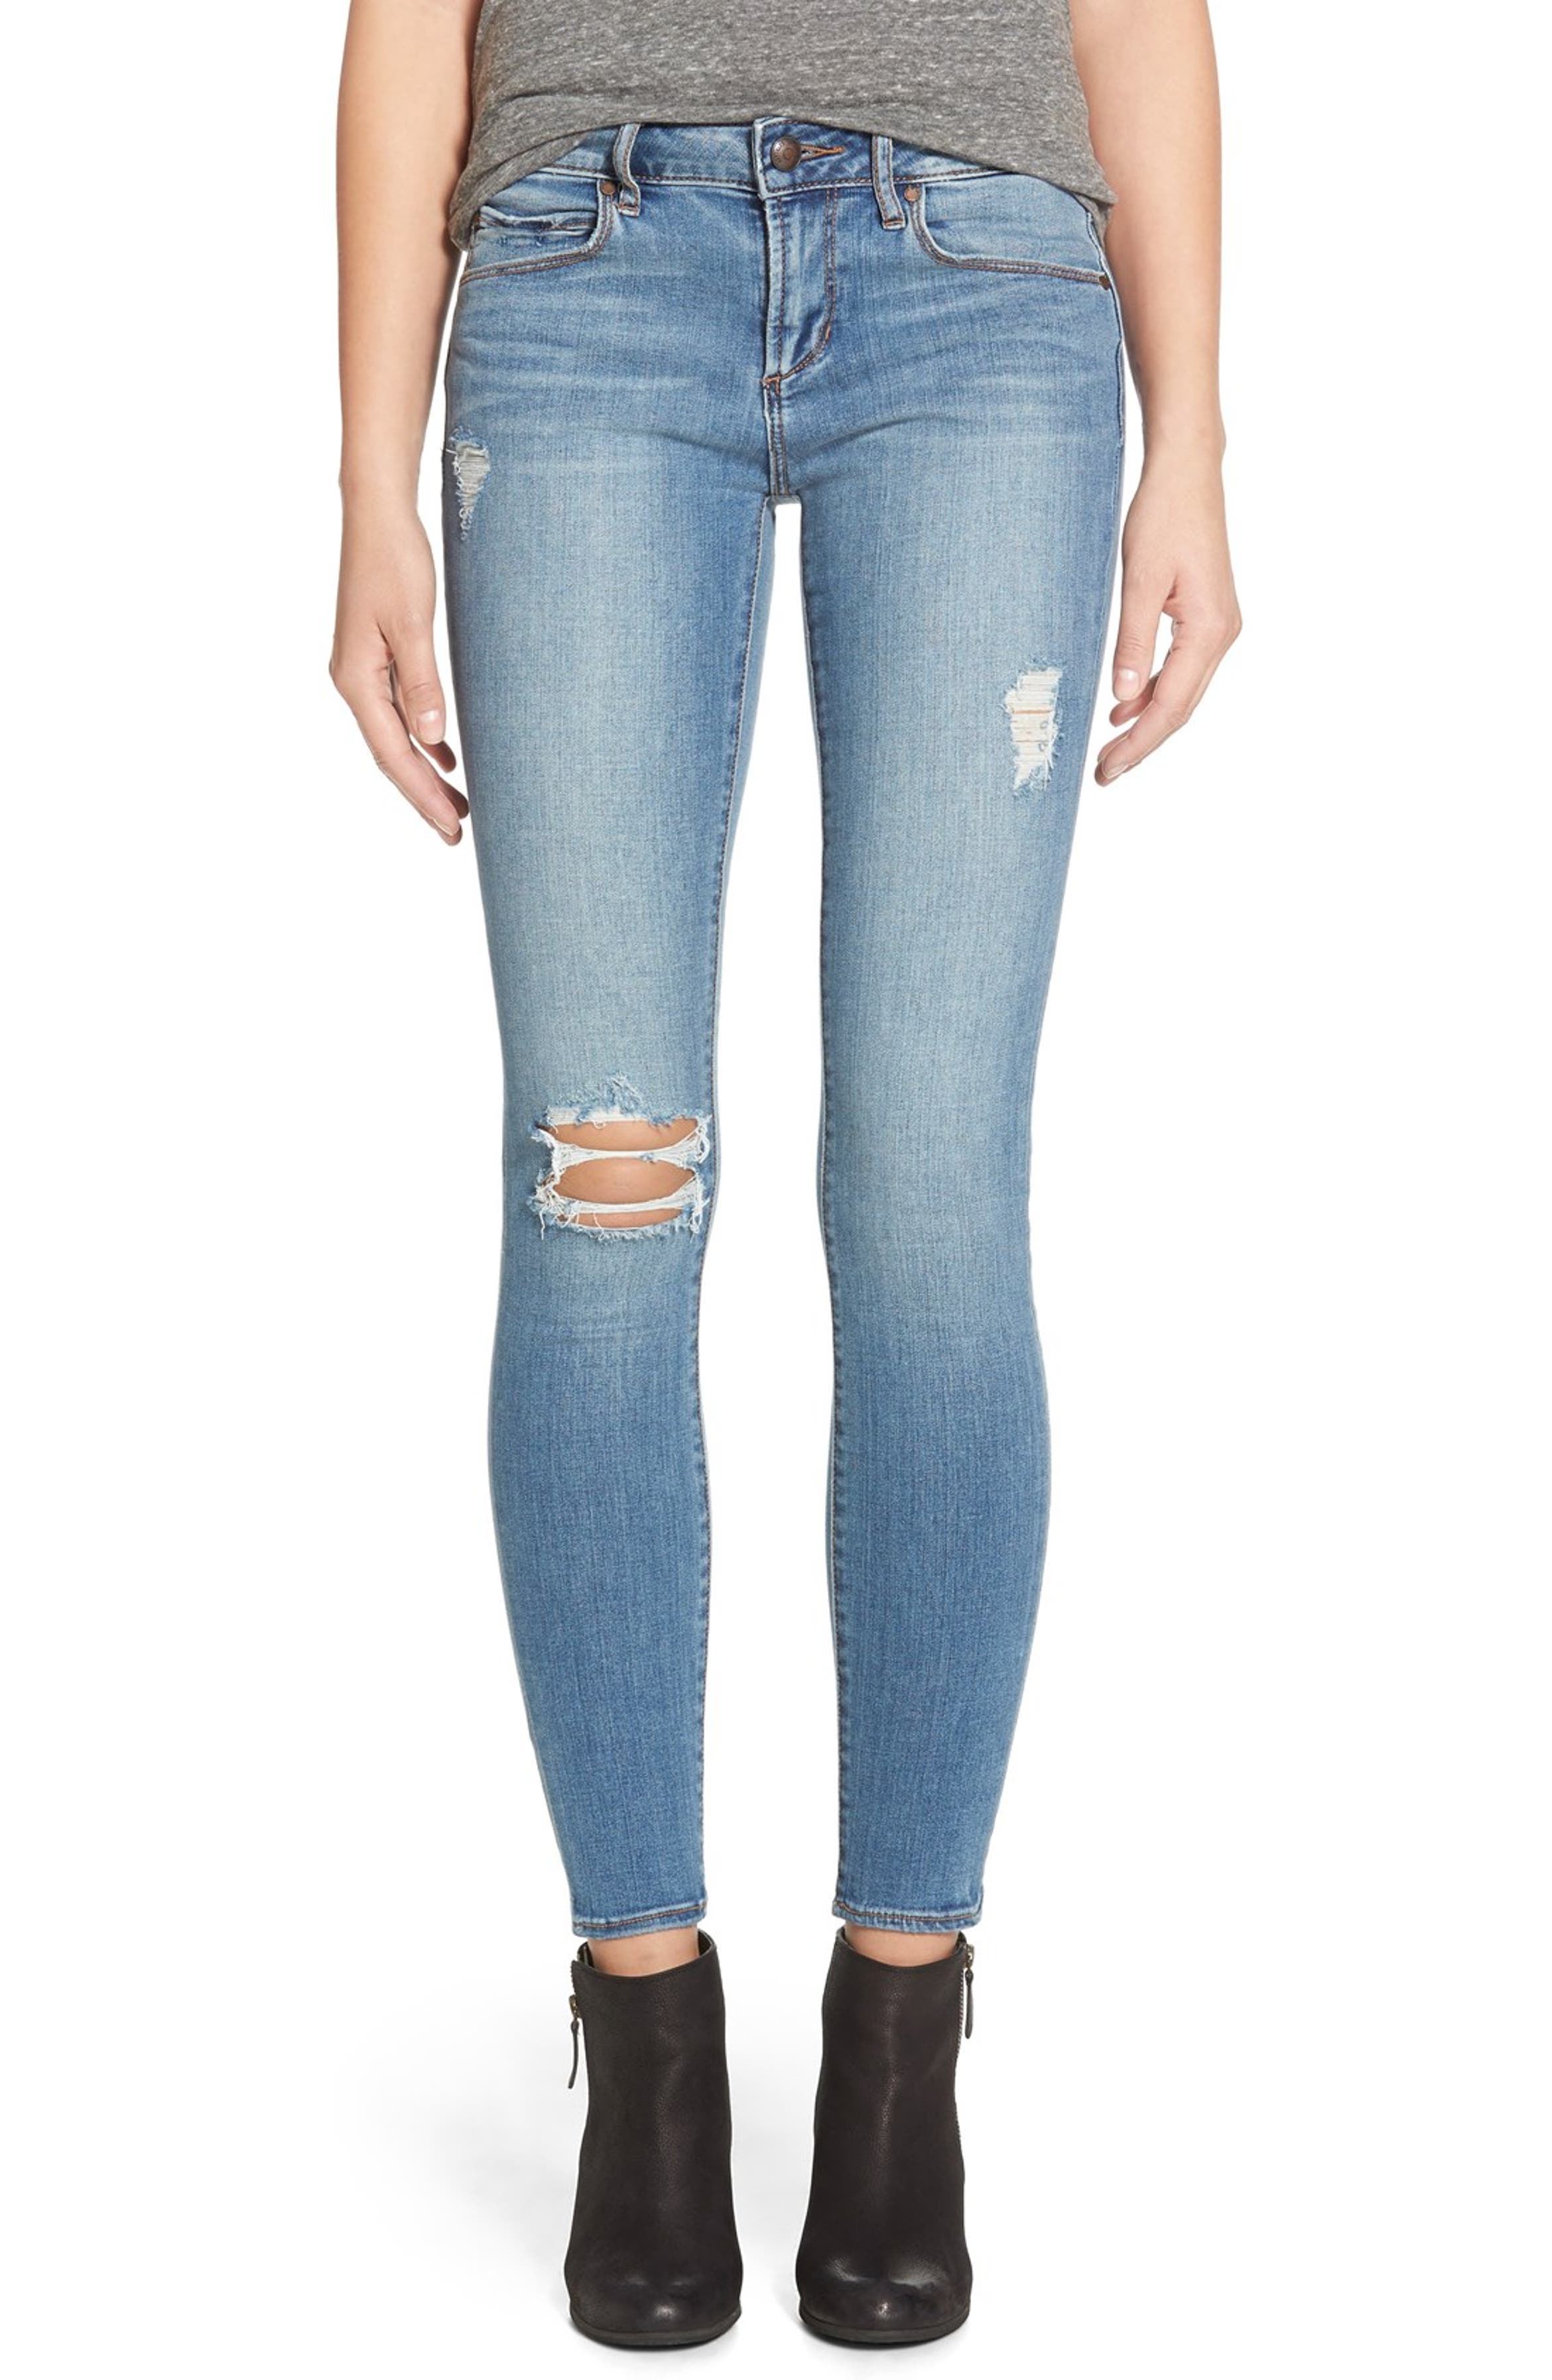 Articles of Society 'Sarah' Distressed Skinny Jeans | Nordstrom